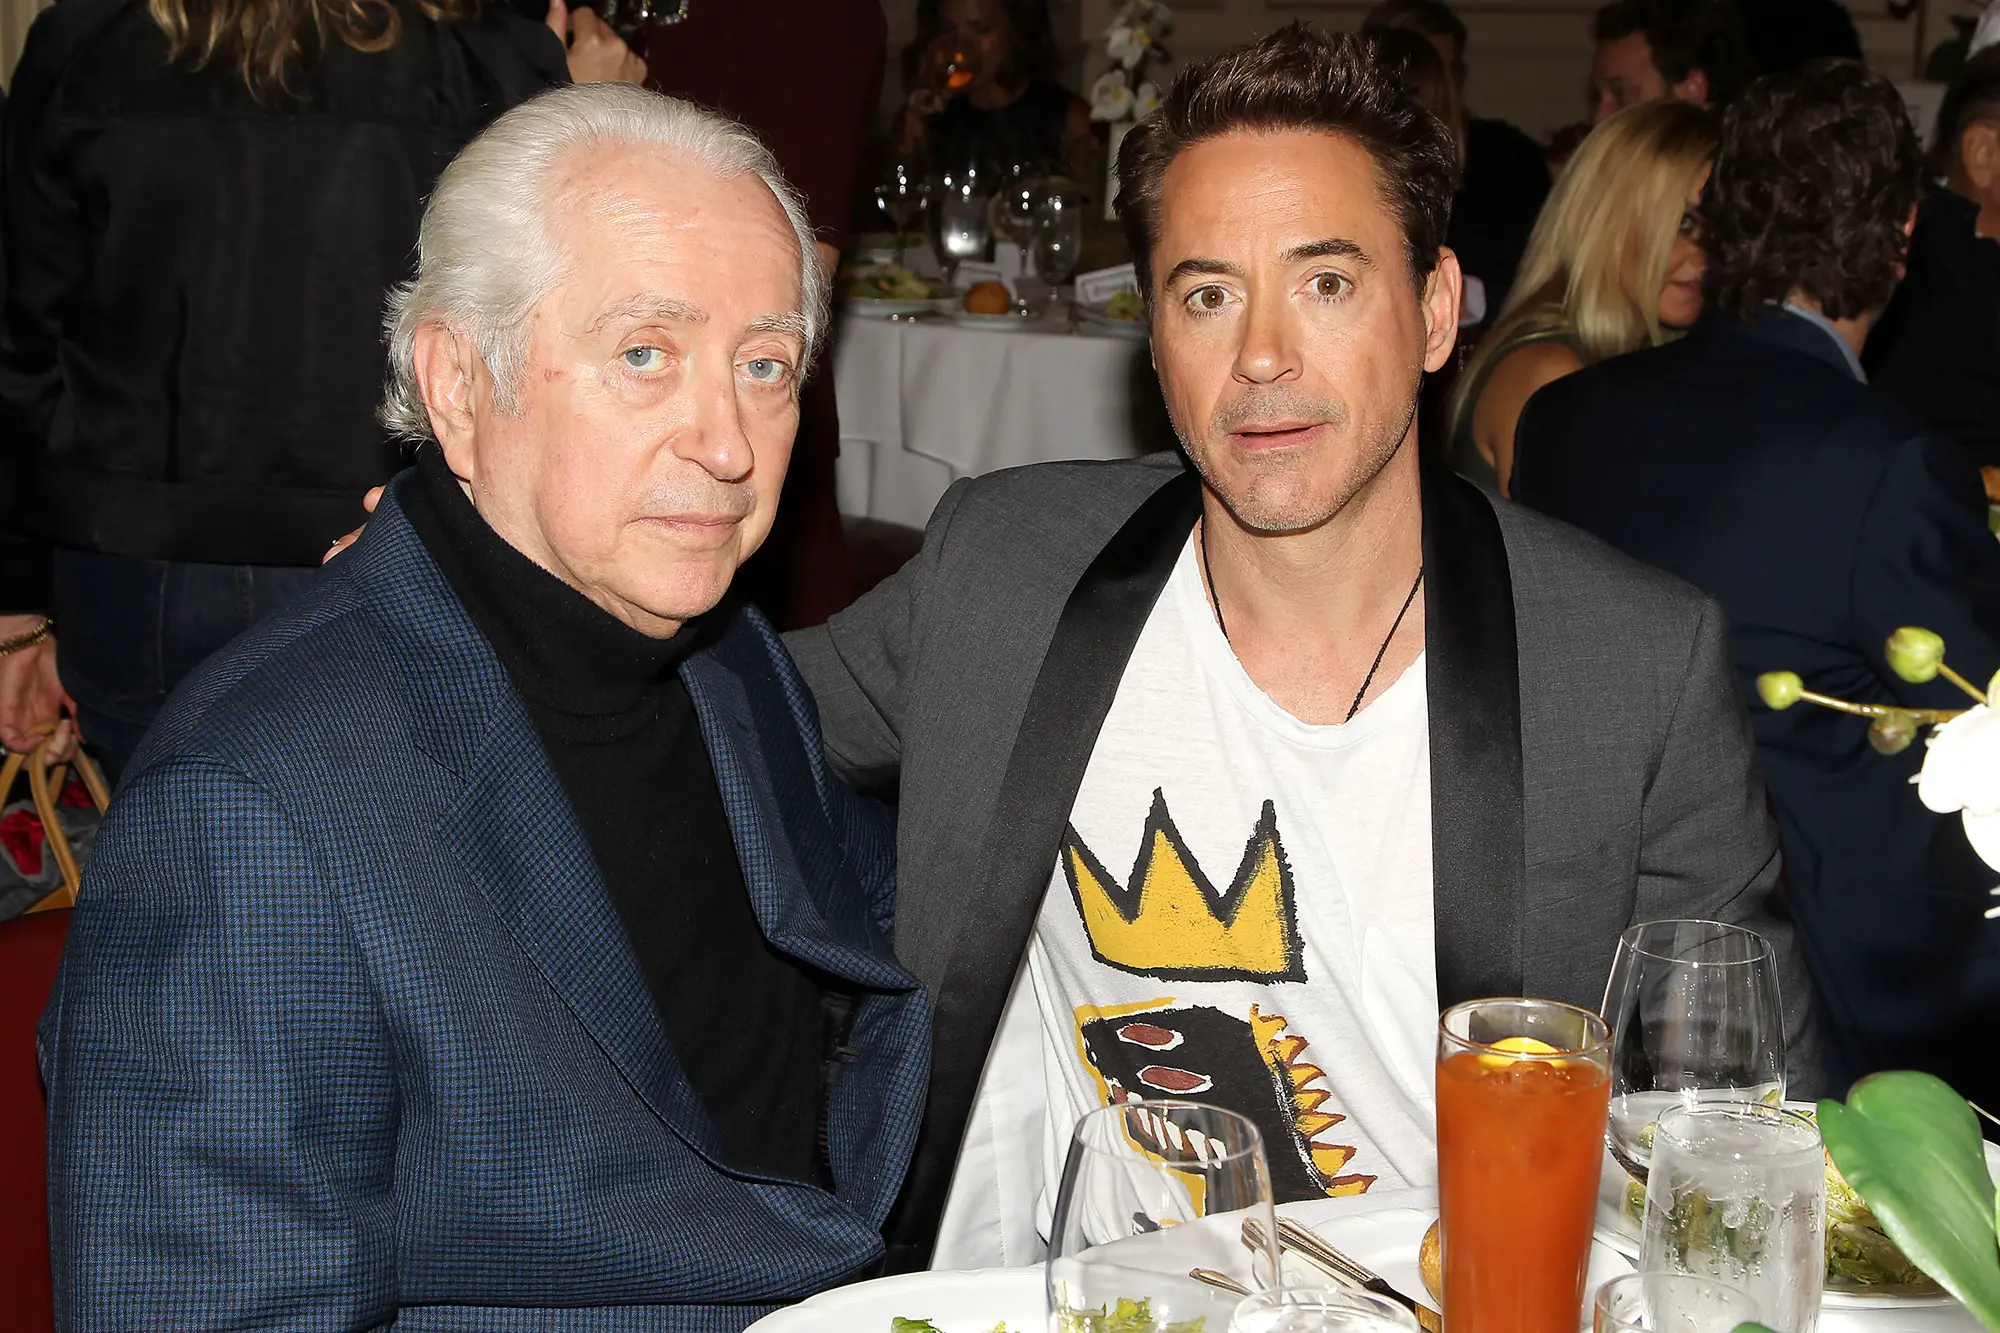 'The Judge' special film luncheon, New York, America - 10 Oct 2014